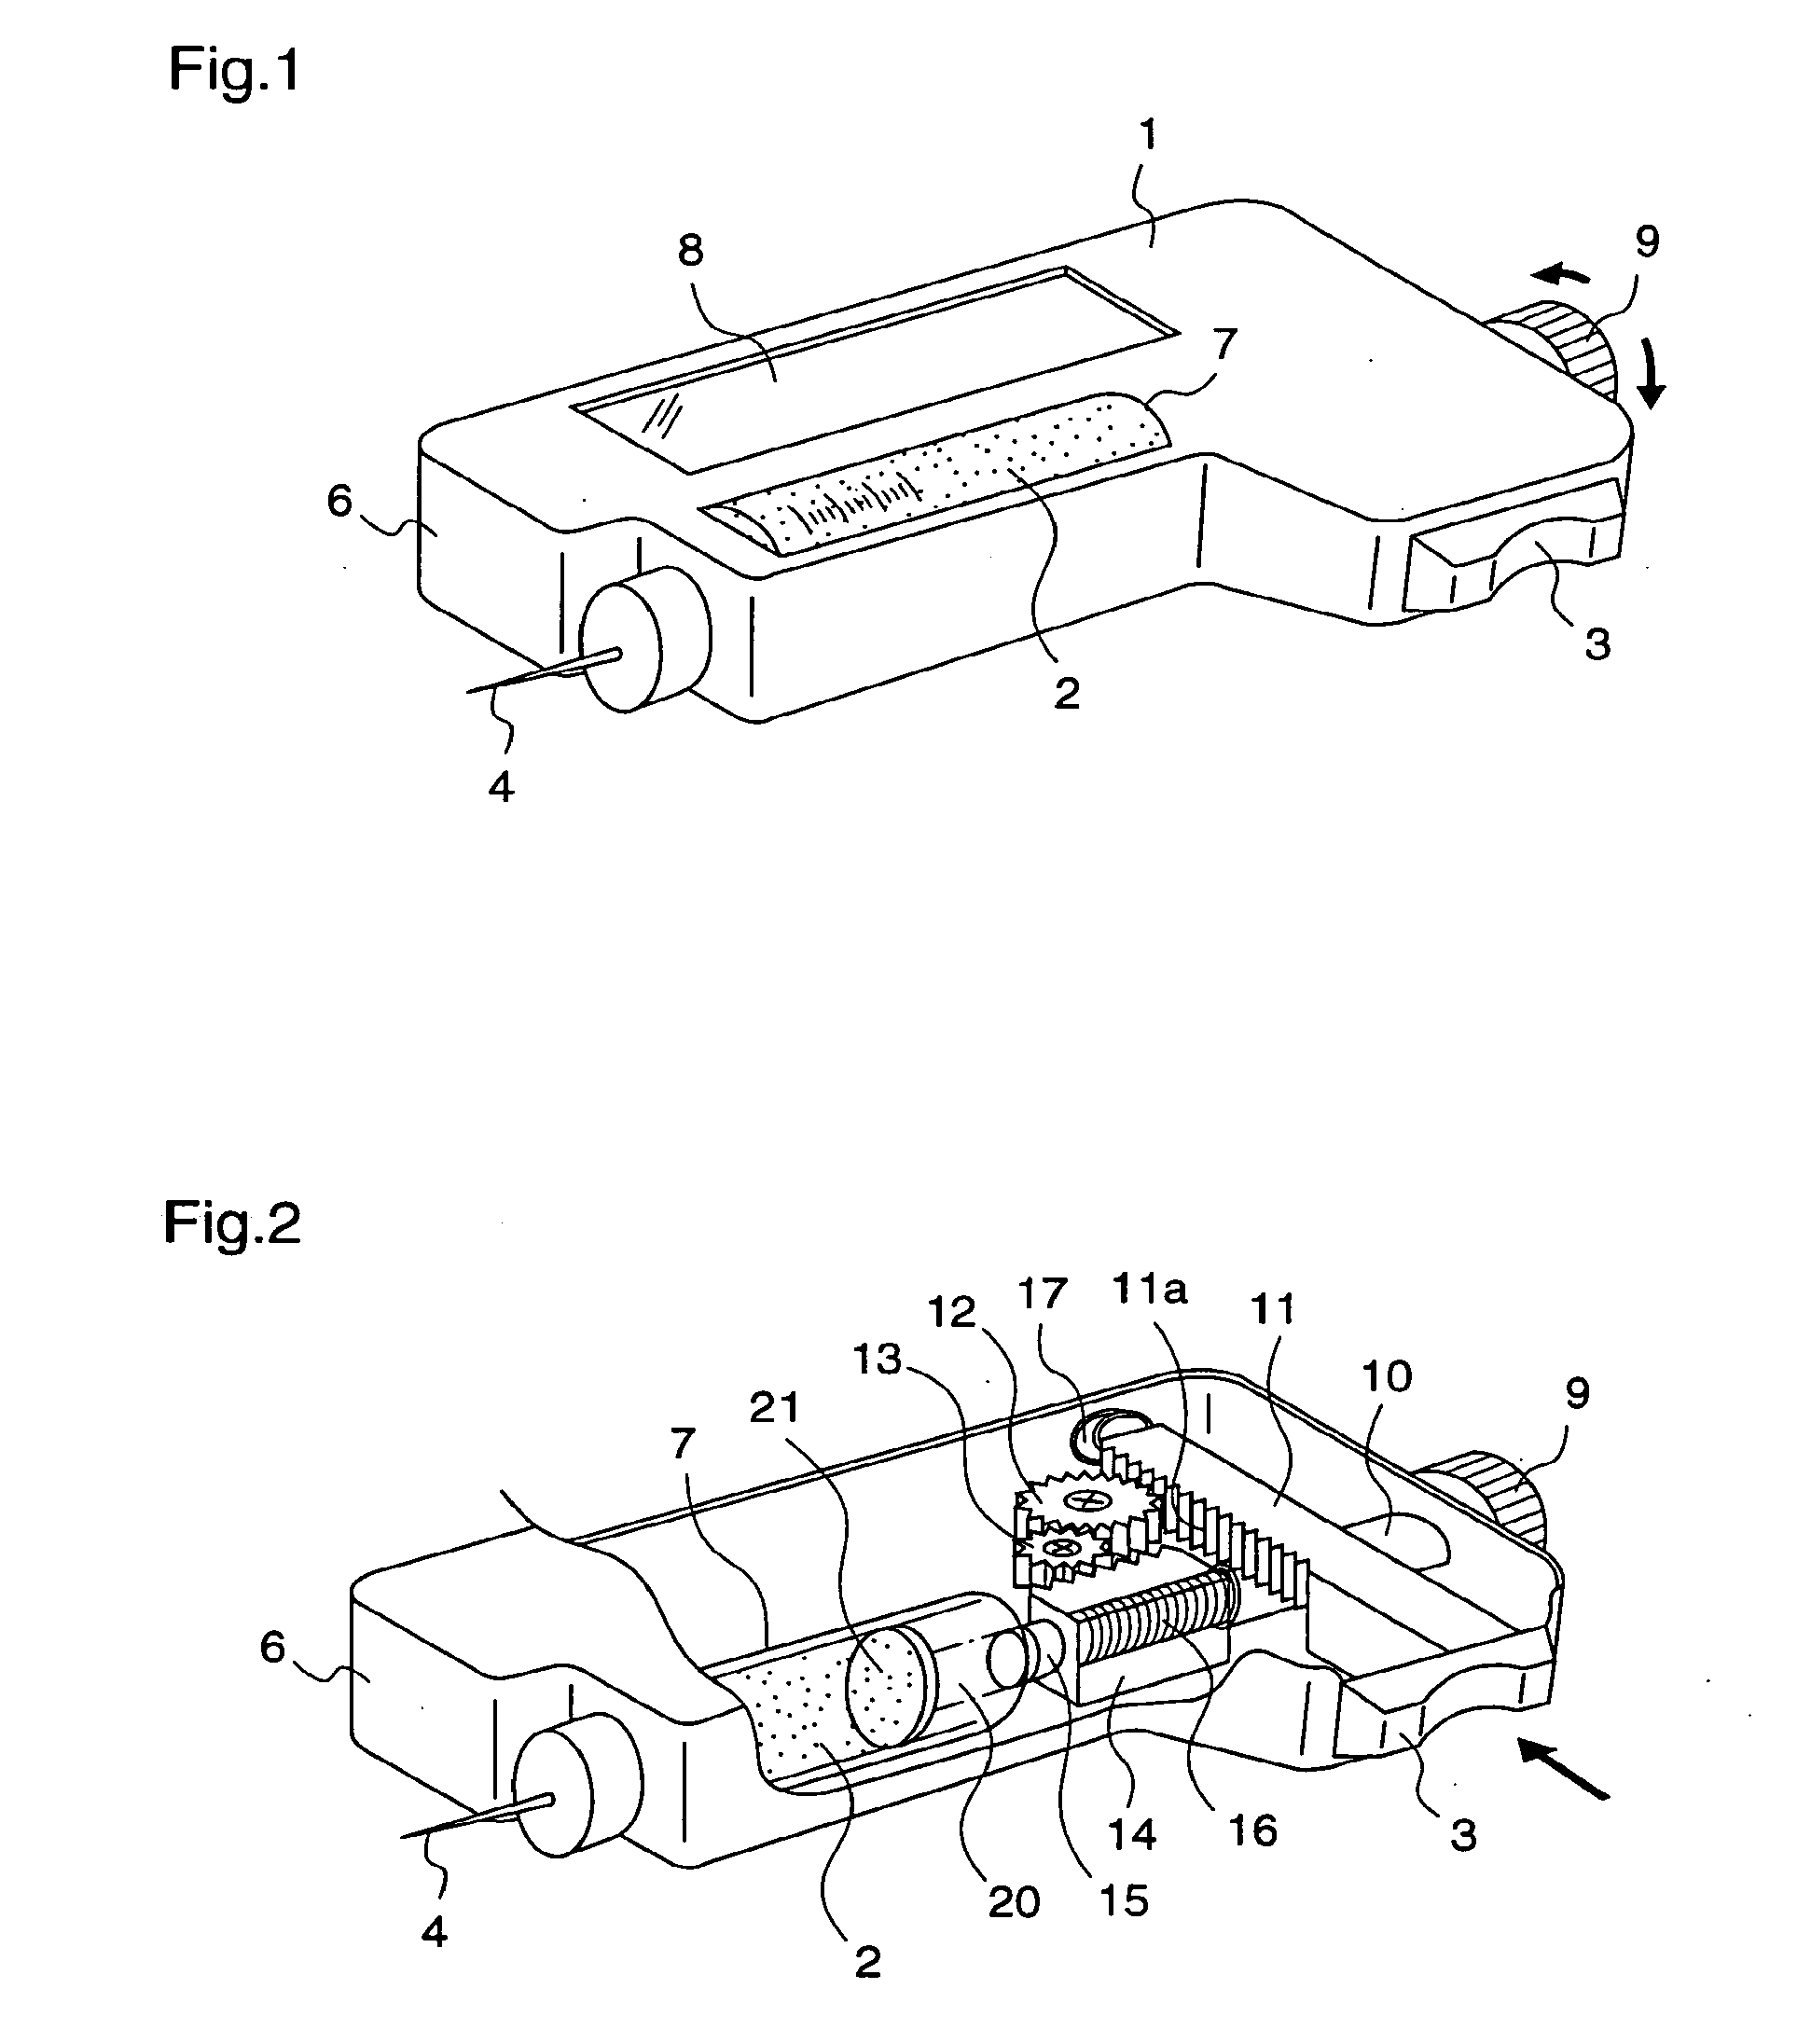 Administration instrument for medical use